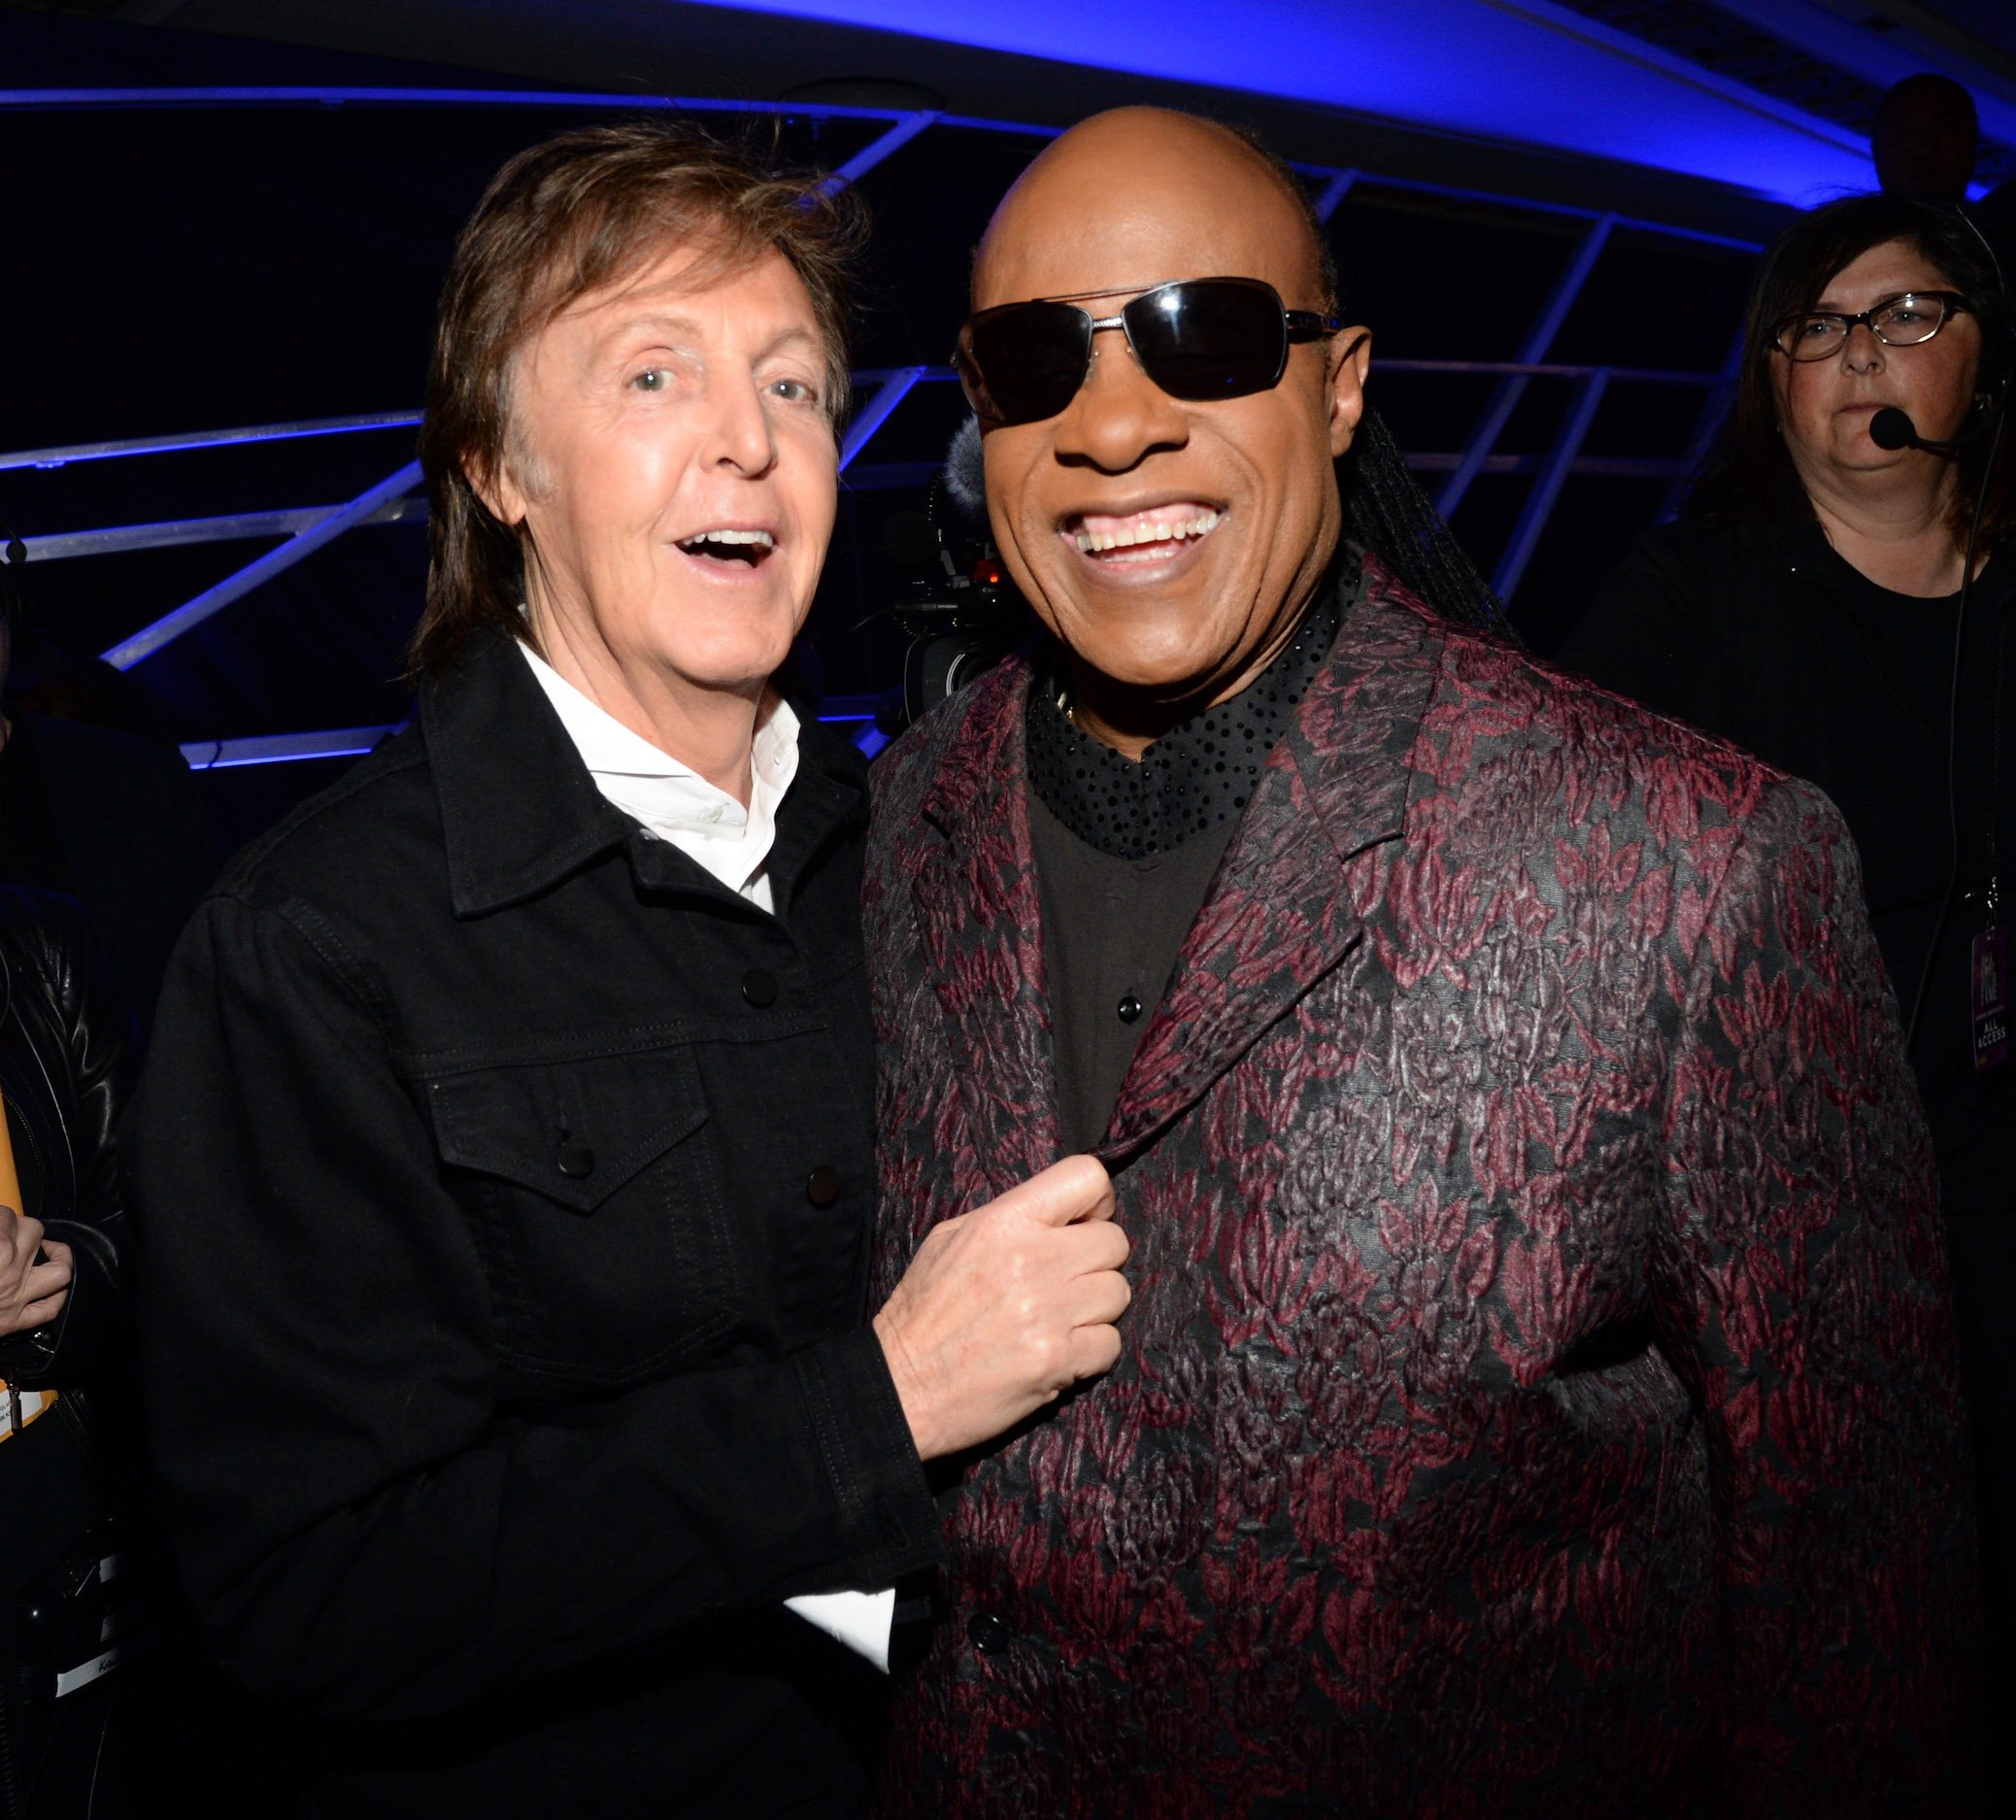 Paul McCartney and Stevie Wonder attend the 30th Annual Rock and Roll Hall of Fame Induction Ceremony in 2015